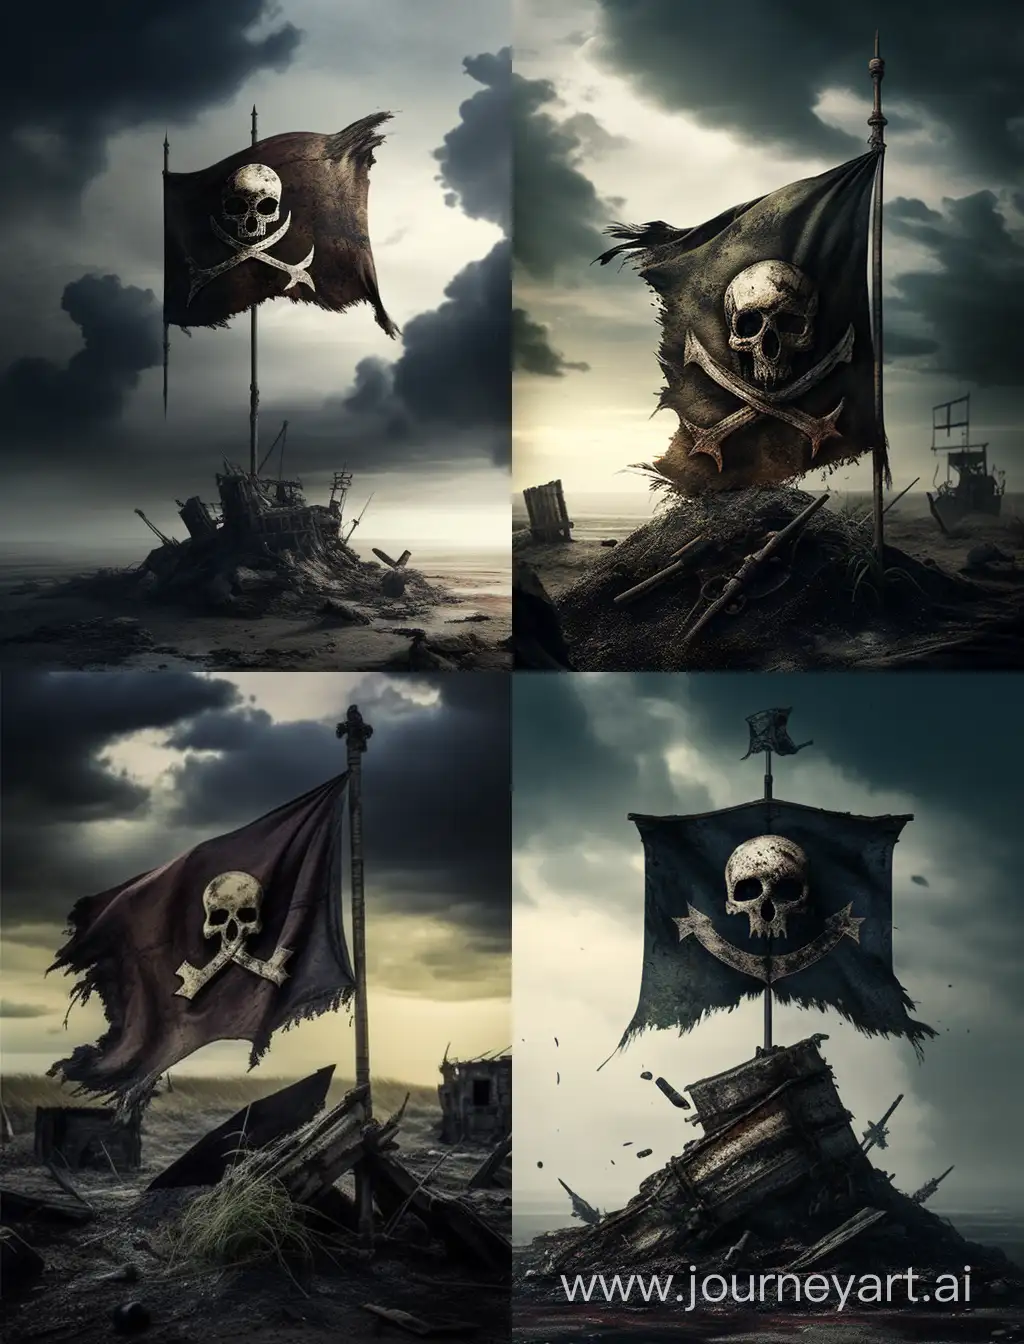 Tattered-Pirate-Flag-Soaring-in-a-Desolate-PostApocalyptic-Sky